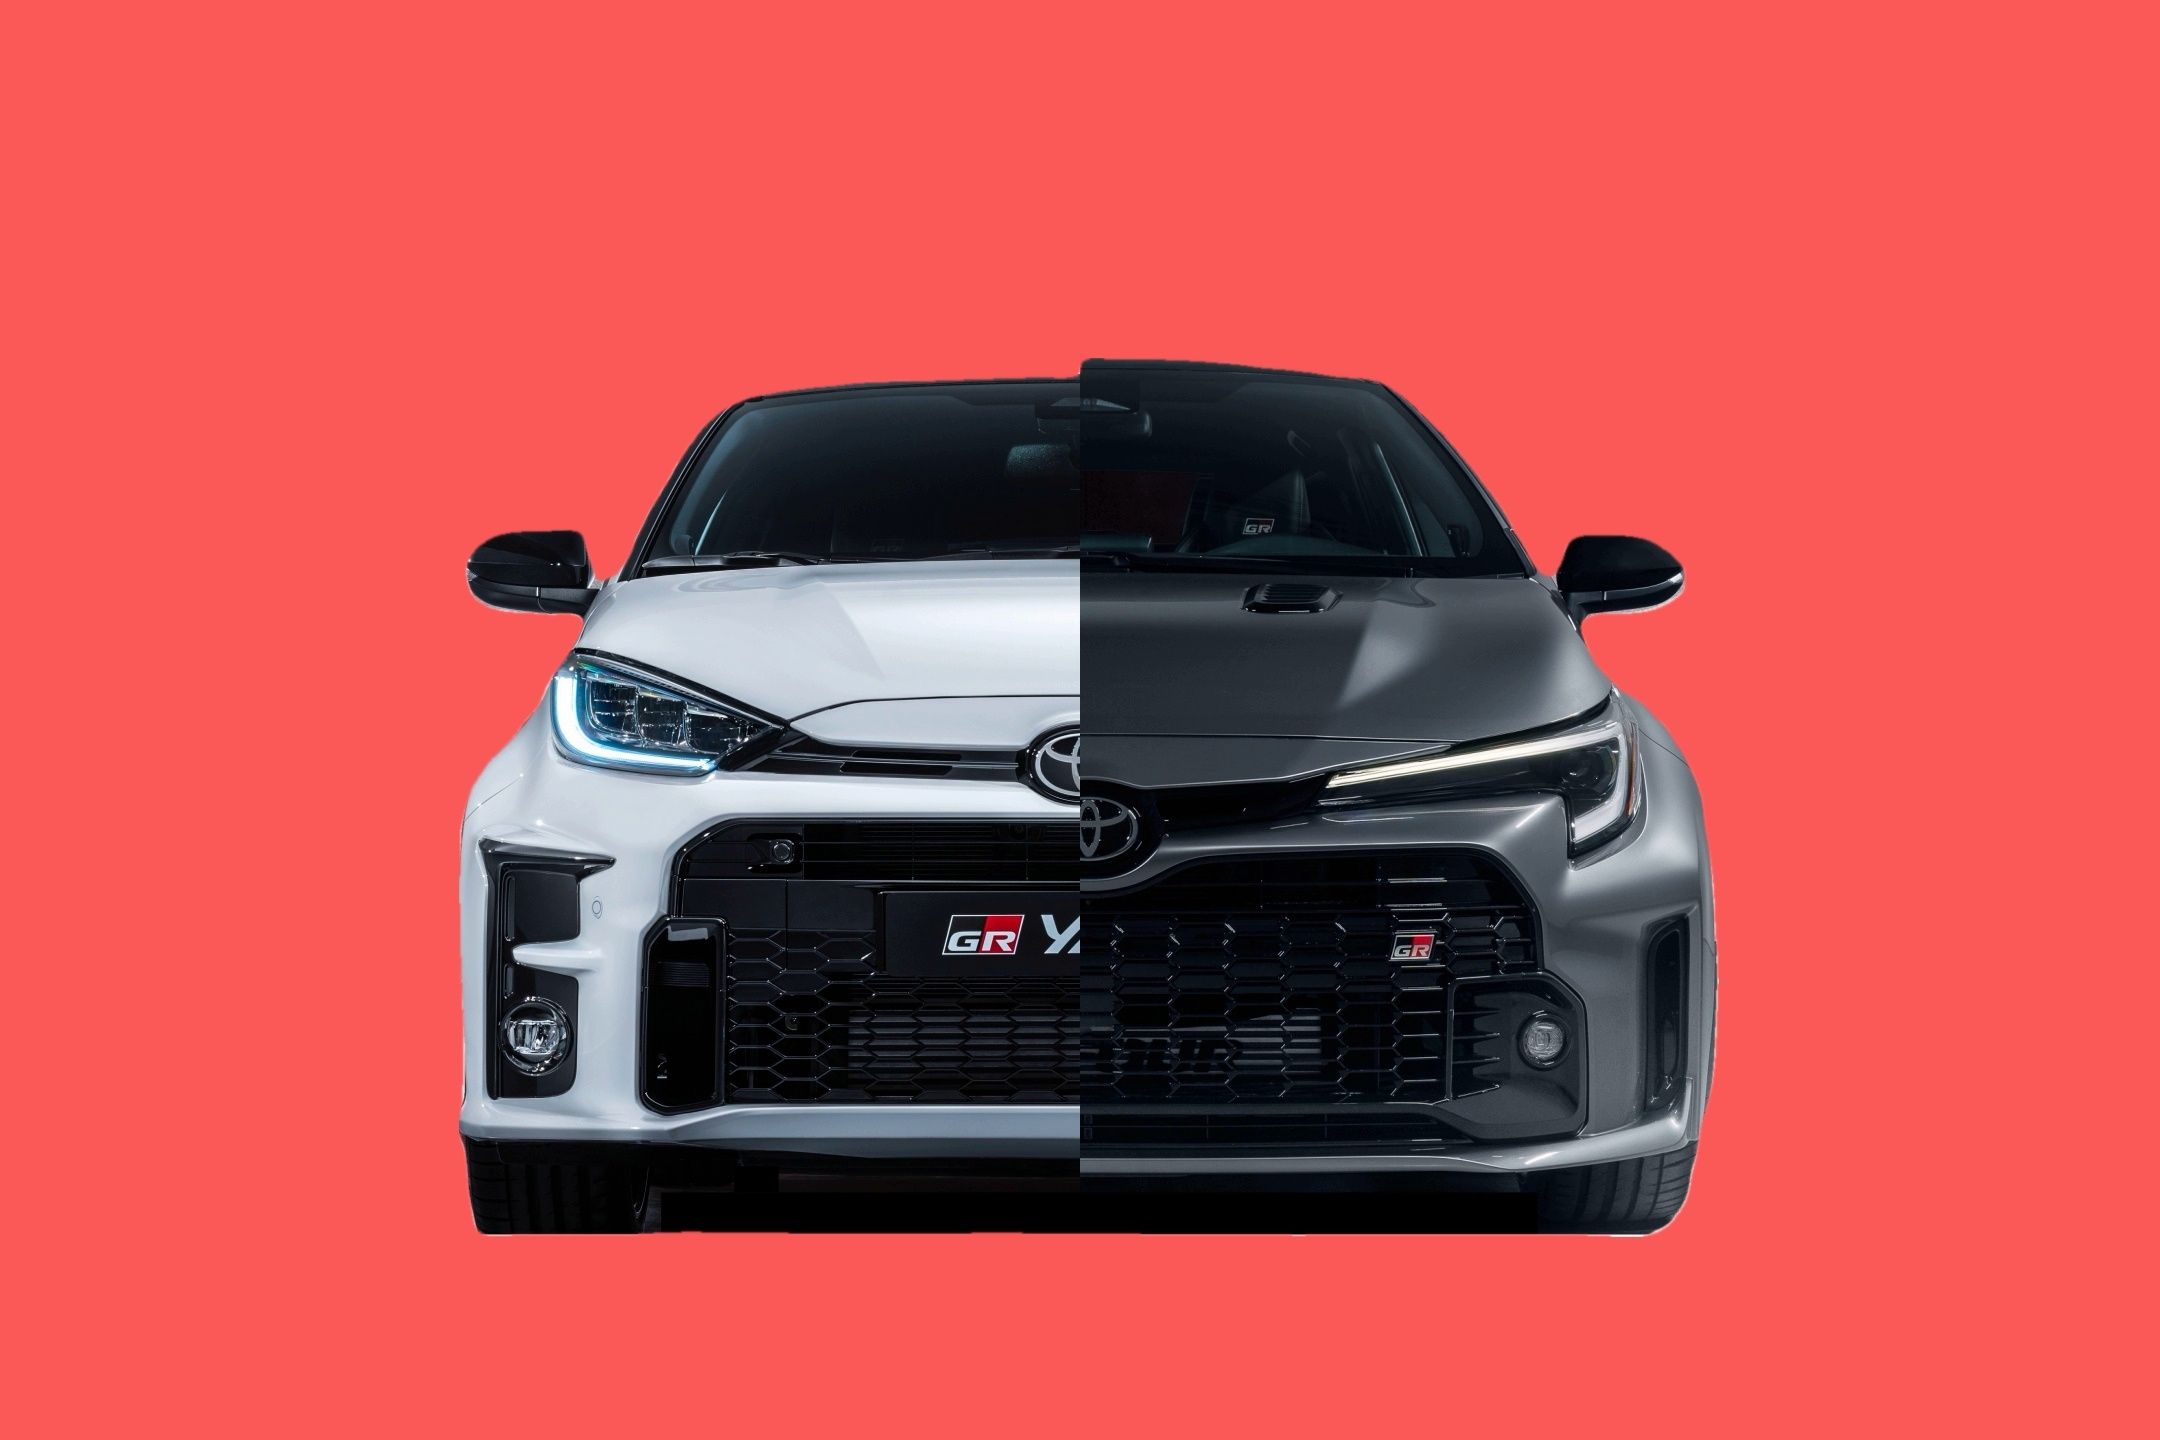 GR Corolla vs GR Yaris Power-To-Weight Ratio Compared